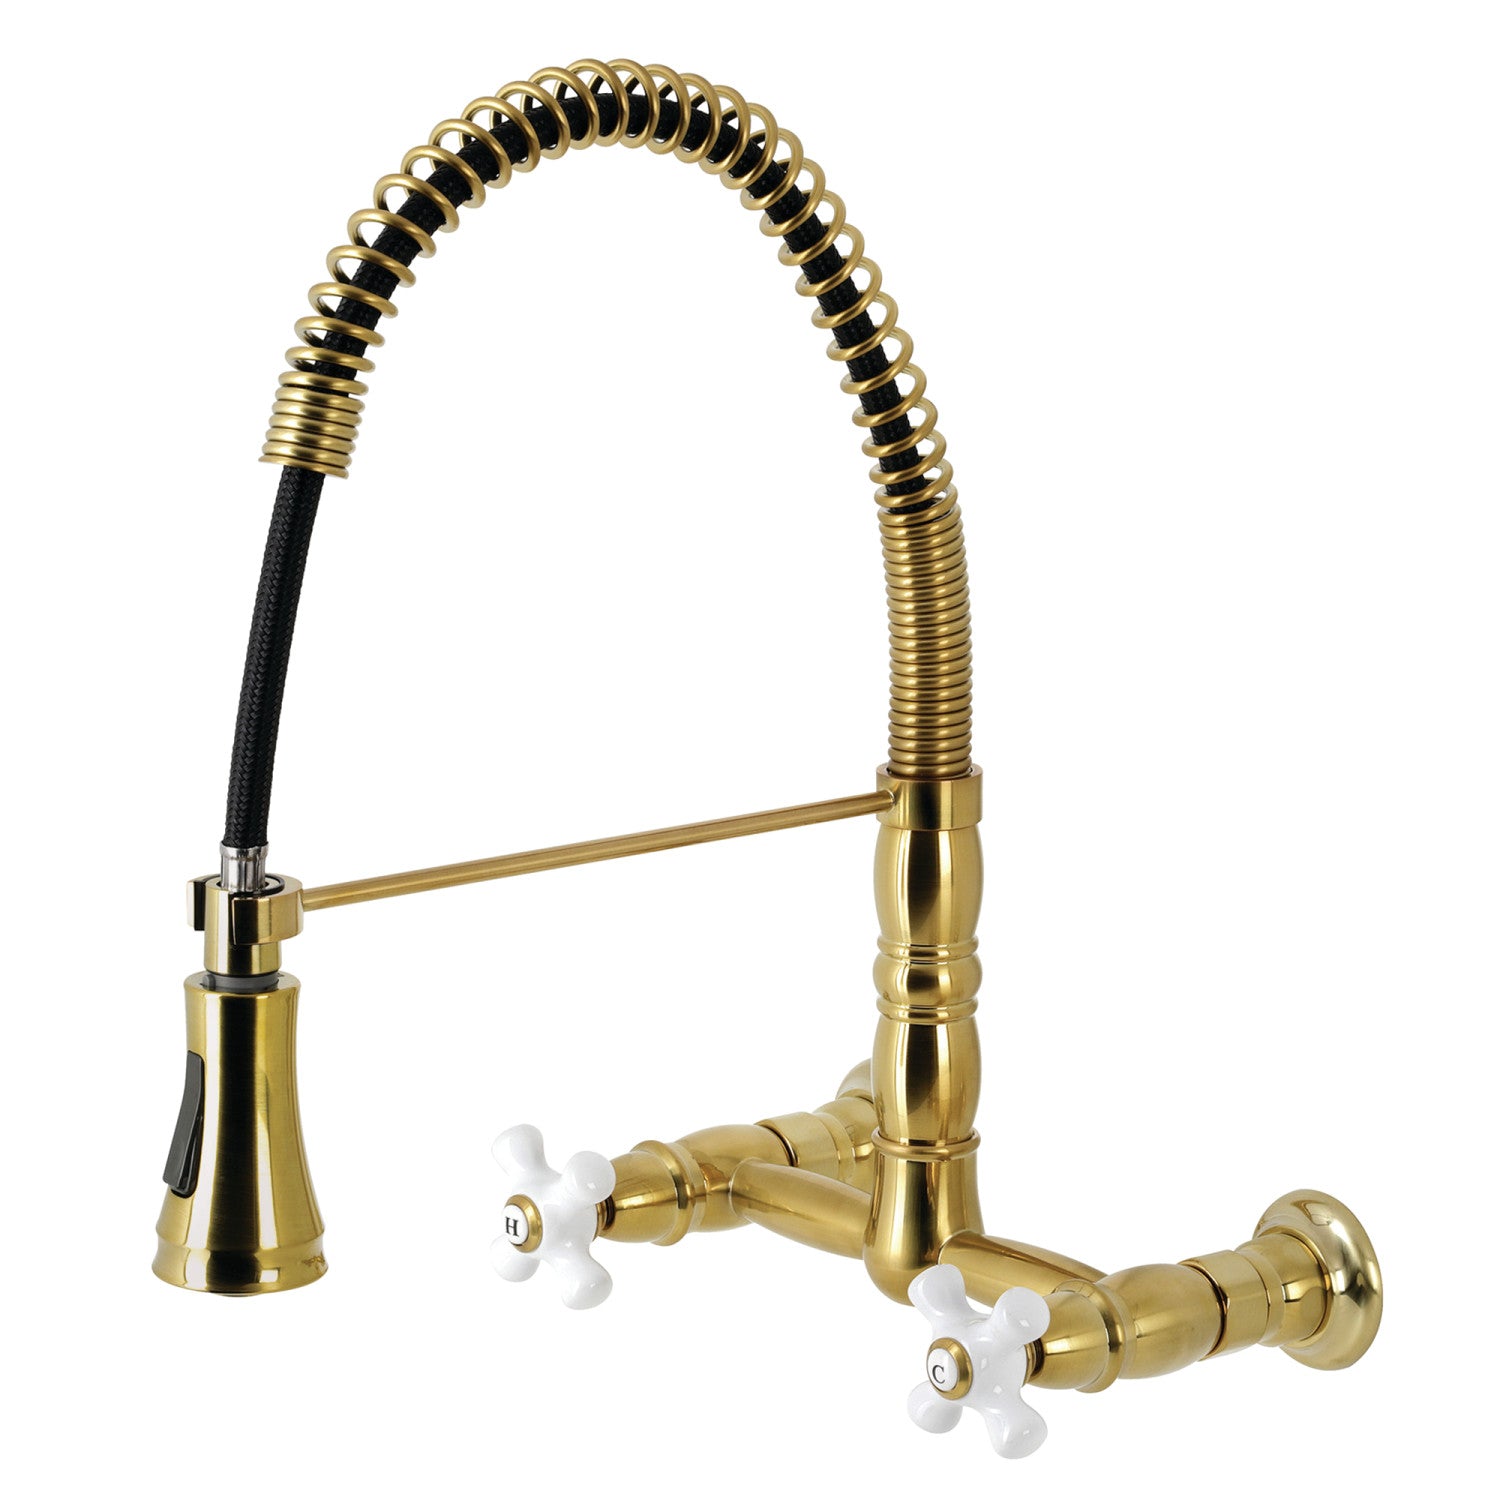 Kingston Brass Heritage GS1247PX Wall Mount Pull-Down Sprayer